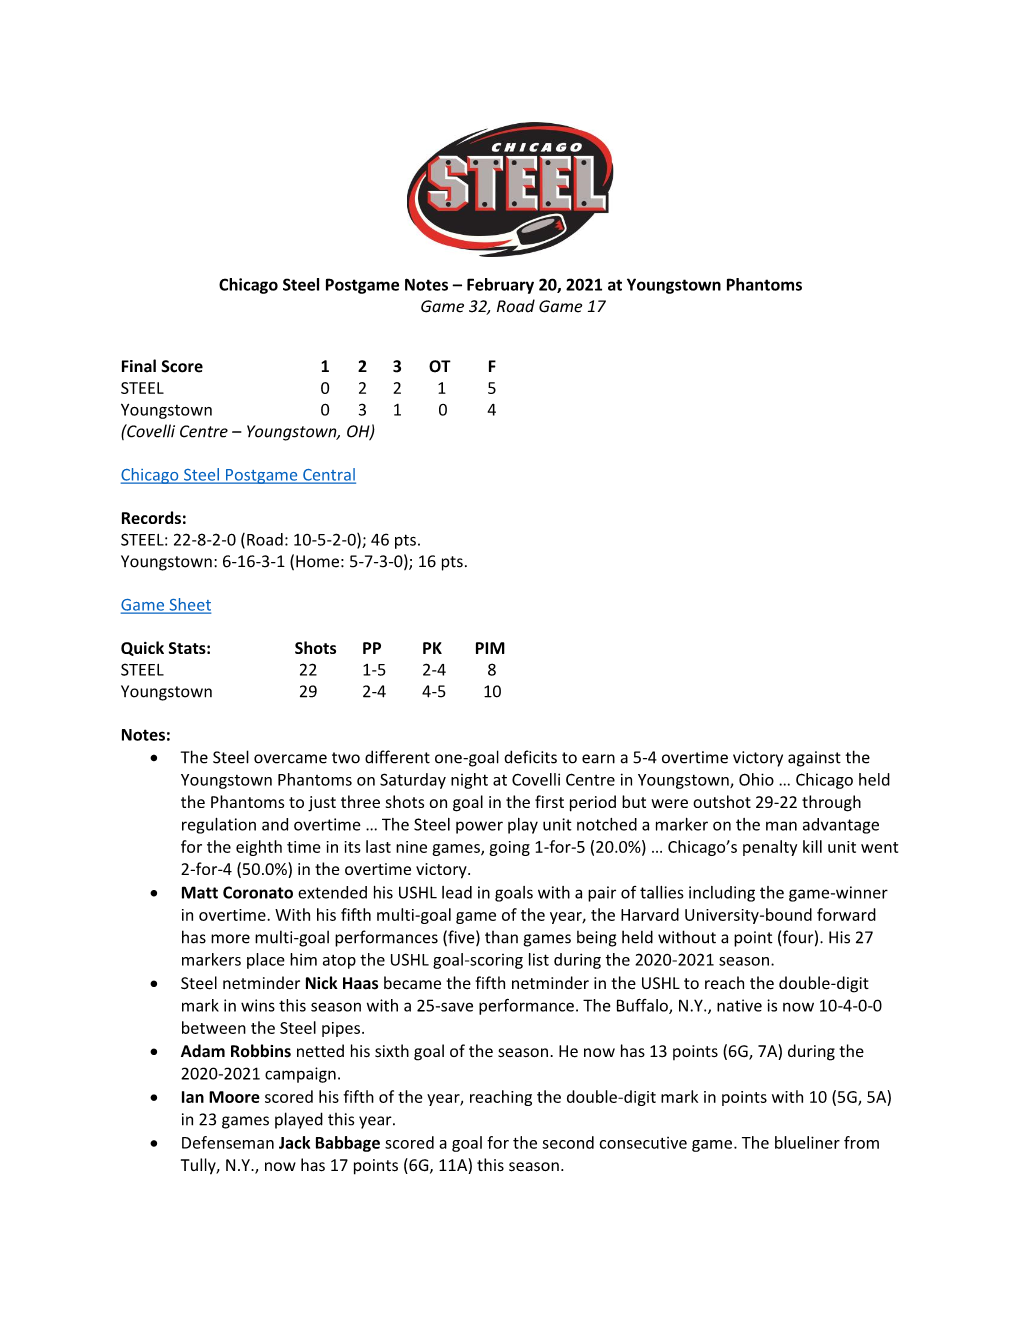 Chicago Steel Postgame Notes – February 20, 2021 at Youngstown Phantoms Game 32, Road Game 17